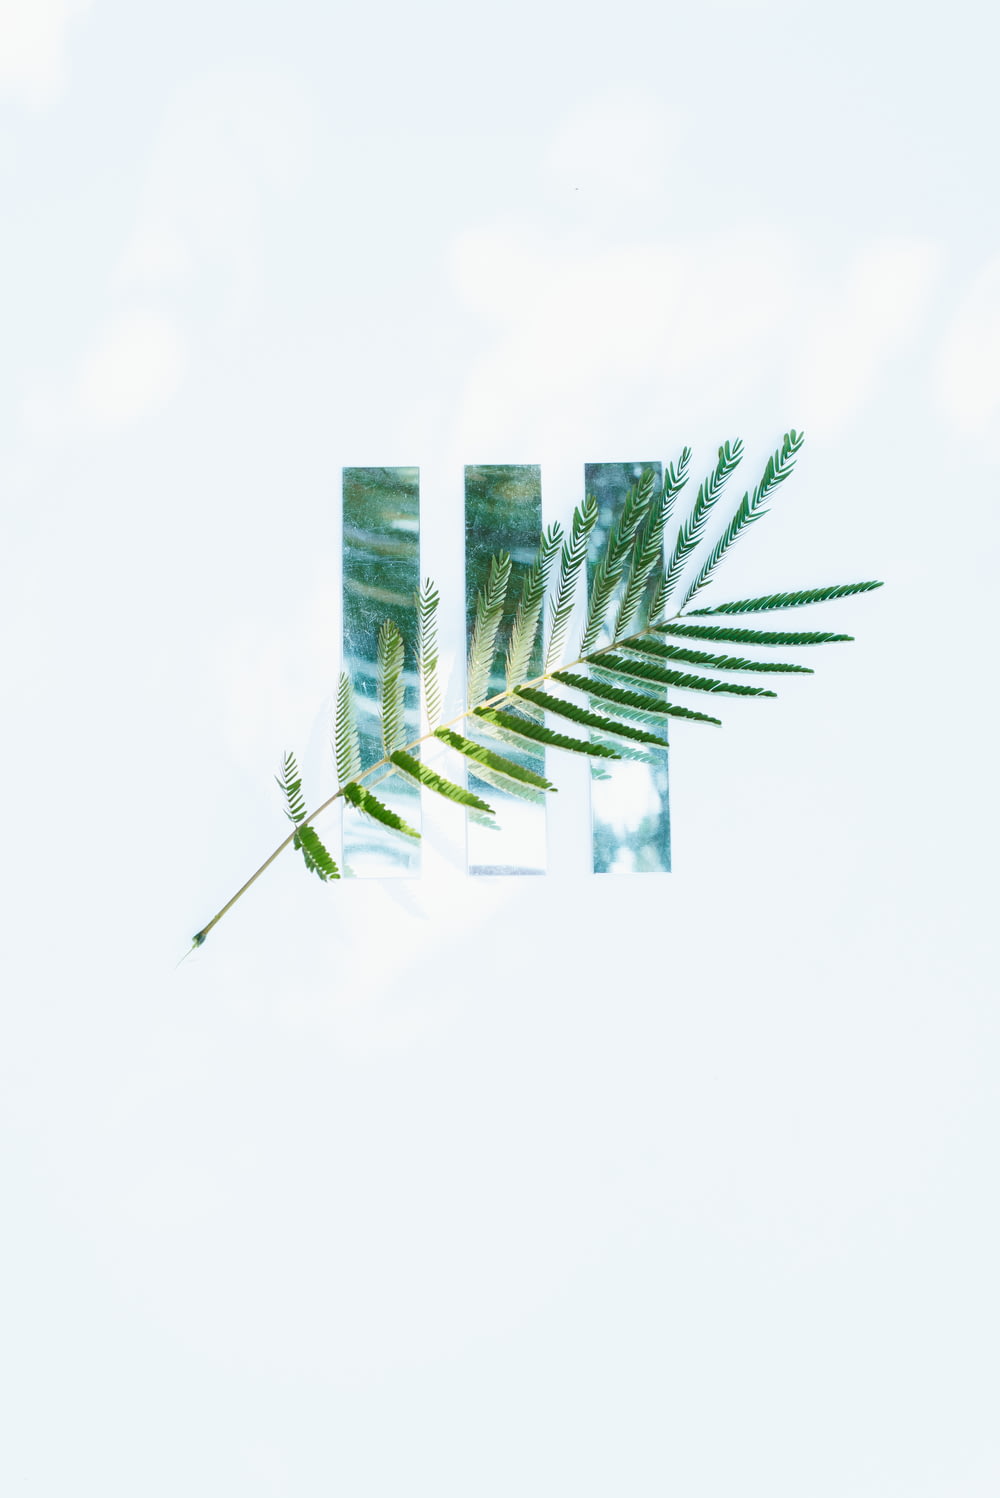 a palm leaf is shown in the reflection of a mirror